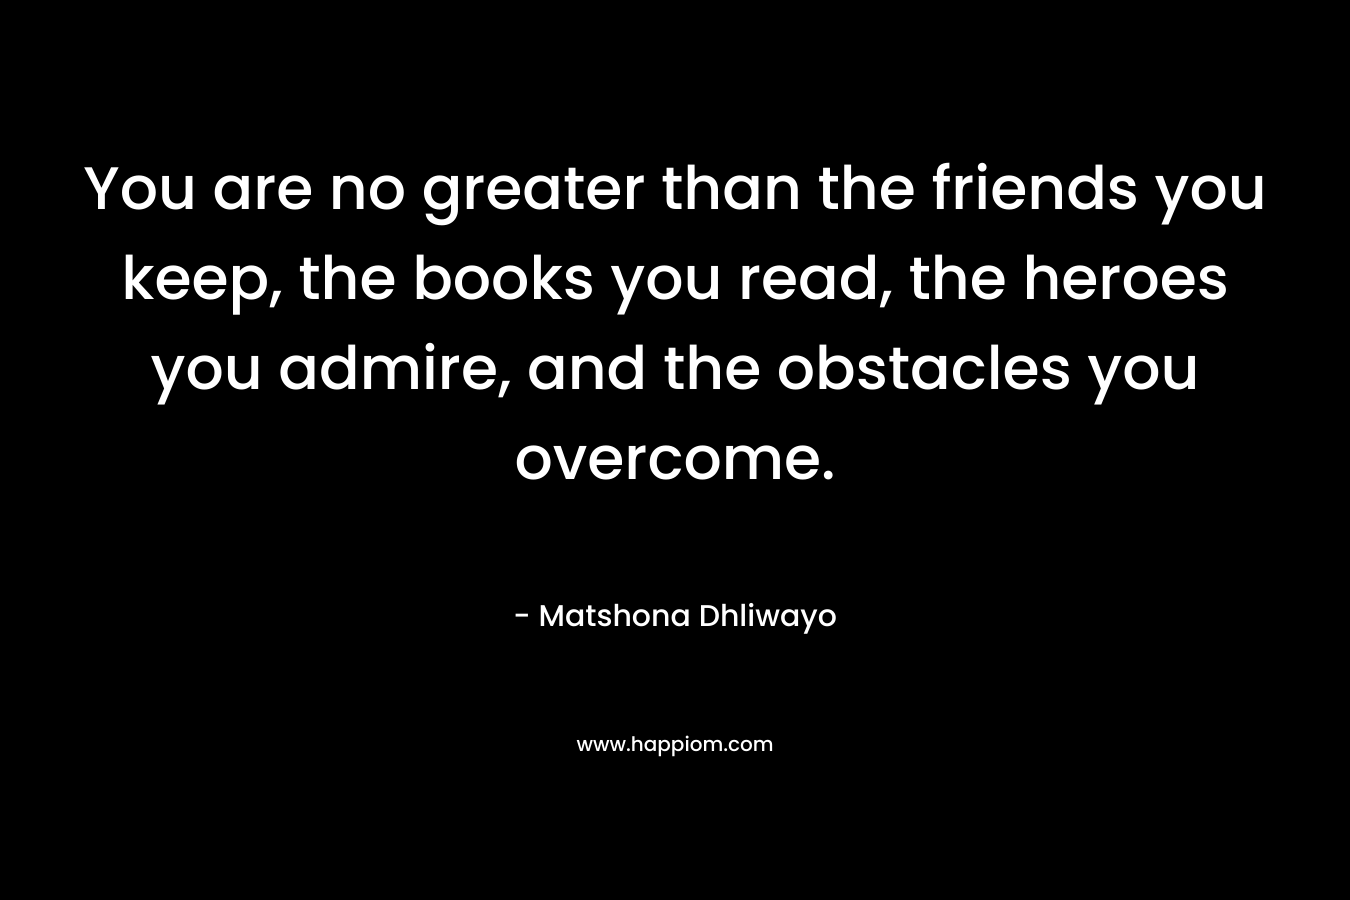 You are no greater than the friends you keep, the books you read, the heroes you admire, and the obstacles you overcome.